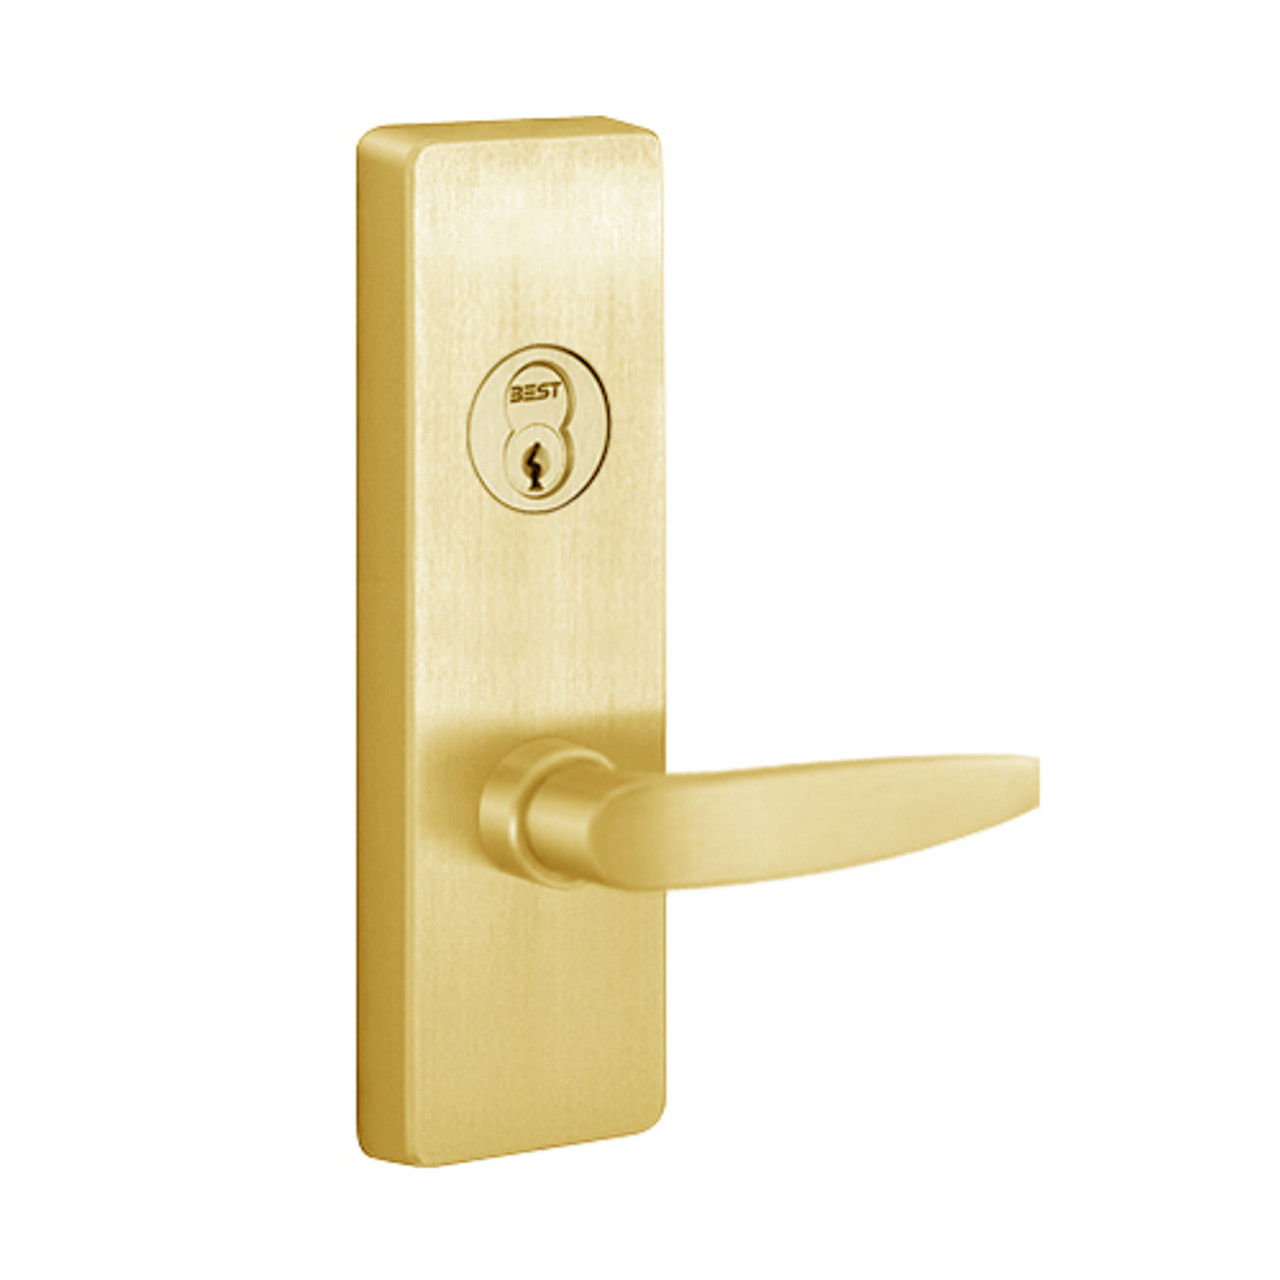 V4908B-605-LHR PHI Key Controls Lever Vandal Resistant Trim with B Lever Design for Apex and Olympian Series Exit Device in Bright Brass Finish